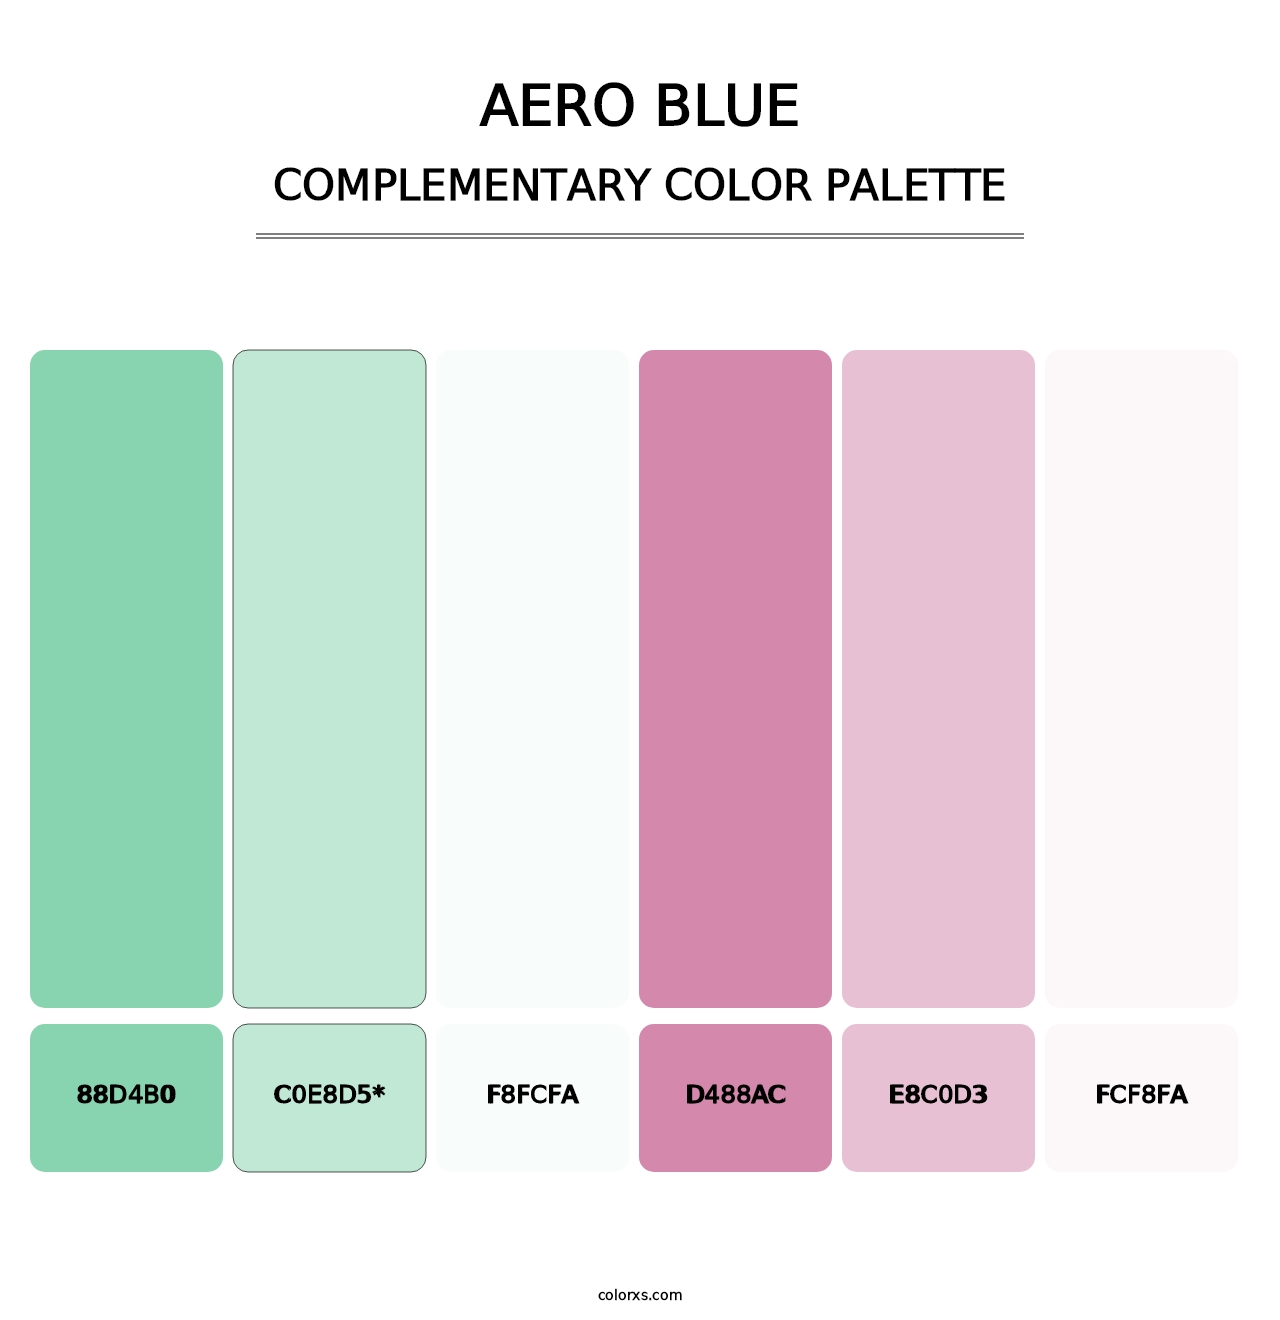 Aero Blue - Complementary Color Palette